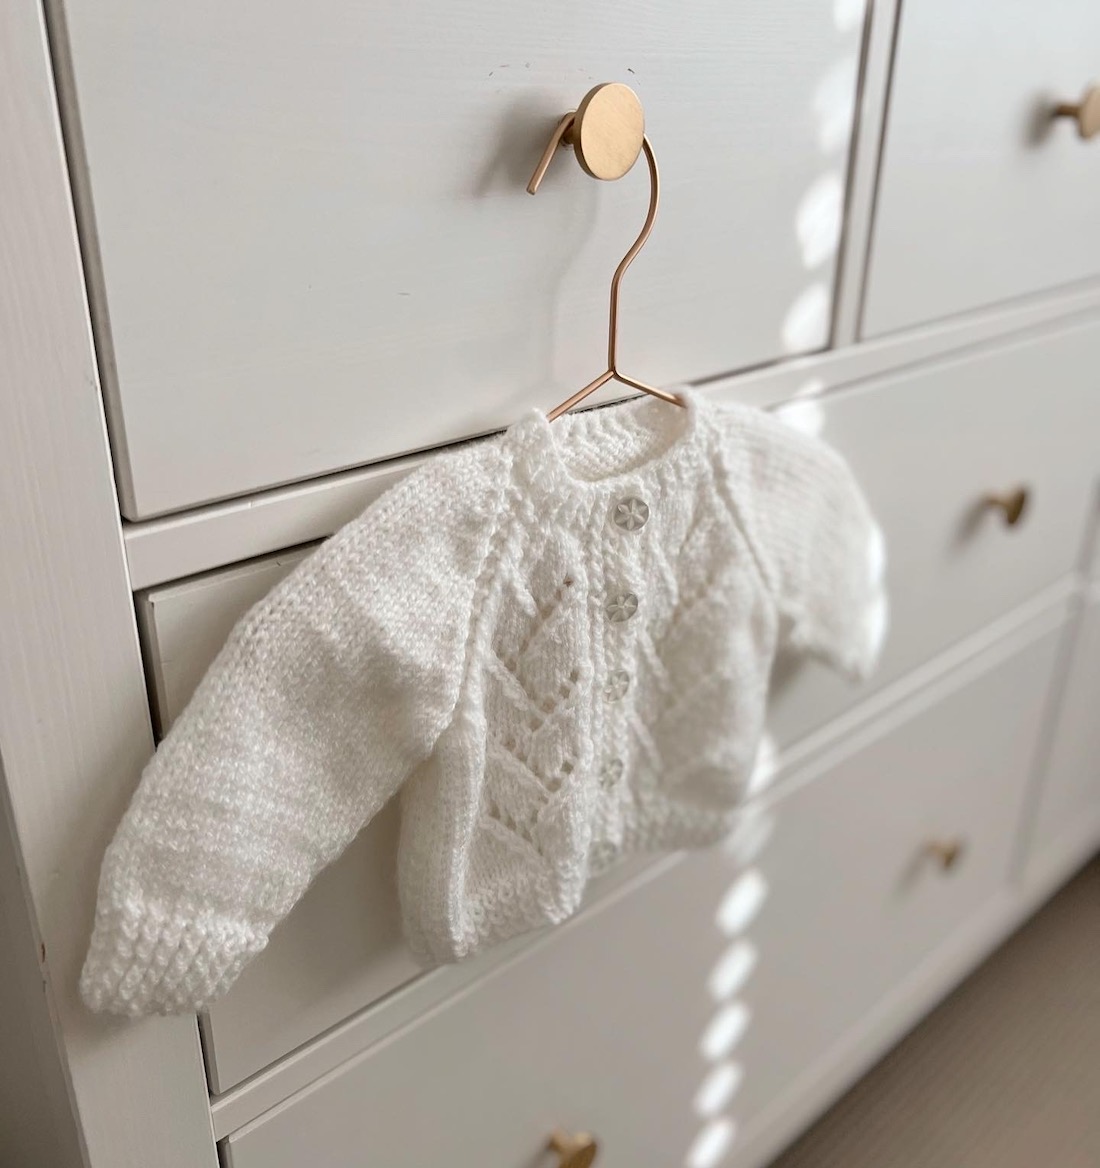 Handmade baby jumper hanging on chest of drawers